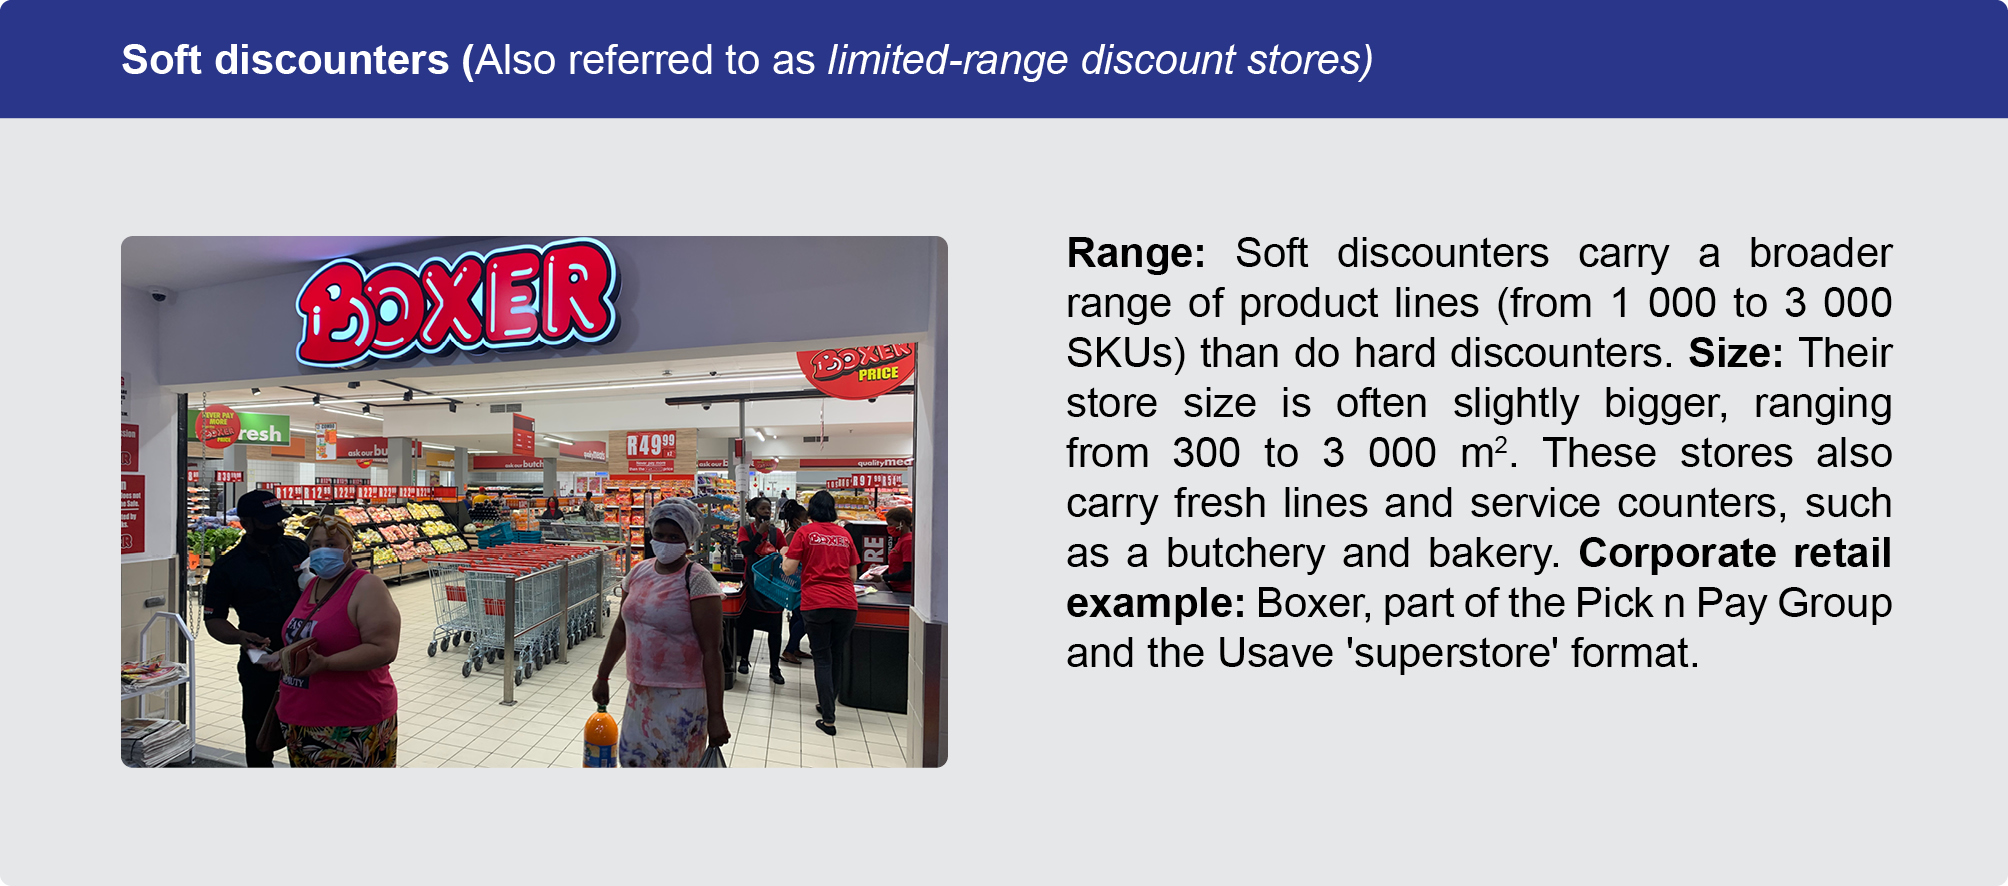 Soft discounters (Also referred to as limited-range discount stores)